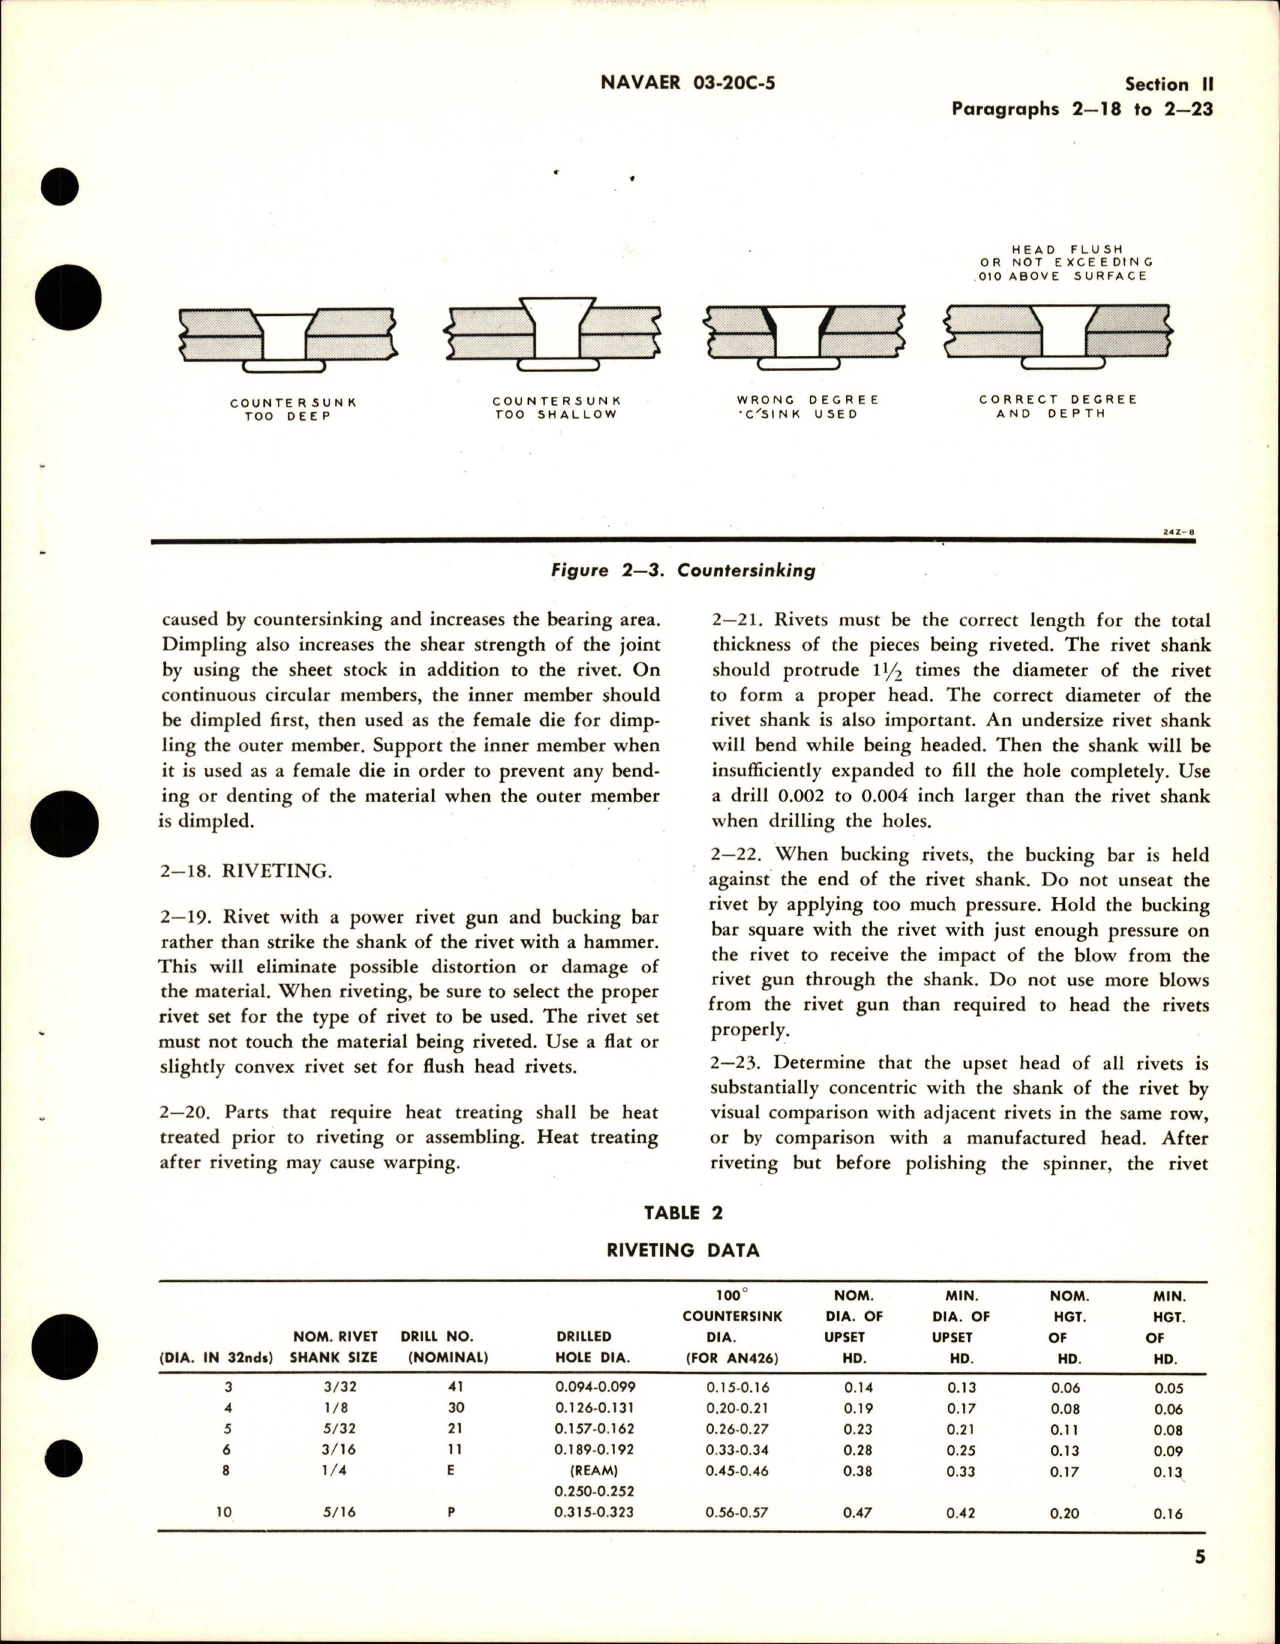 Sample page 9 from AirCorps Library document: Overhaul Instructions for Aircraft Propeller Spinner and Anti-Icing - Assembly 535247 